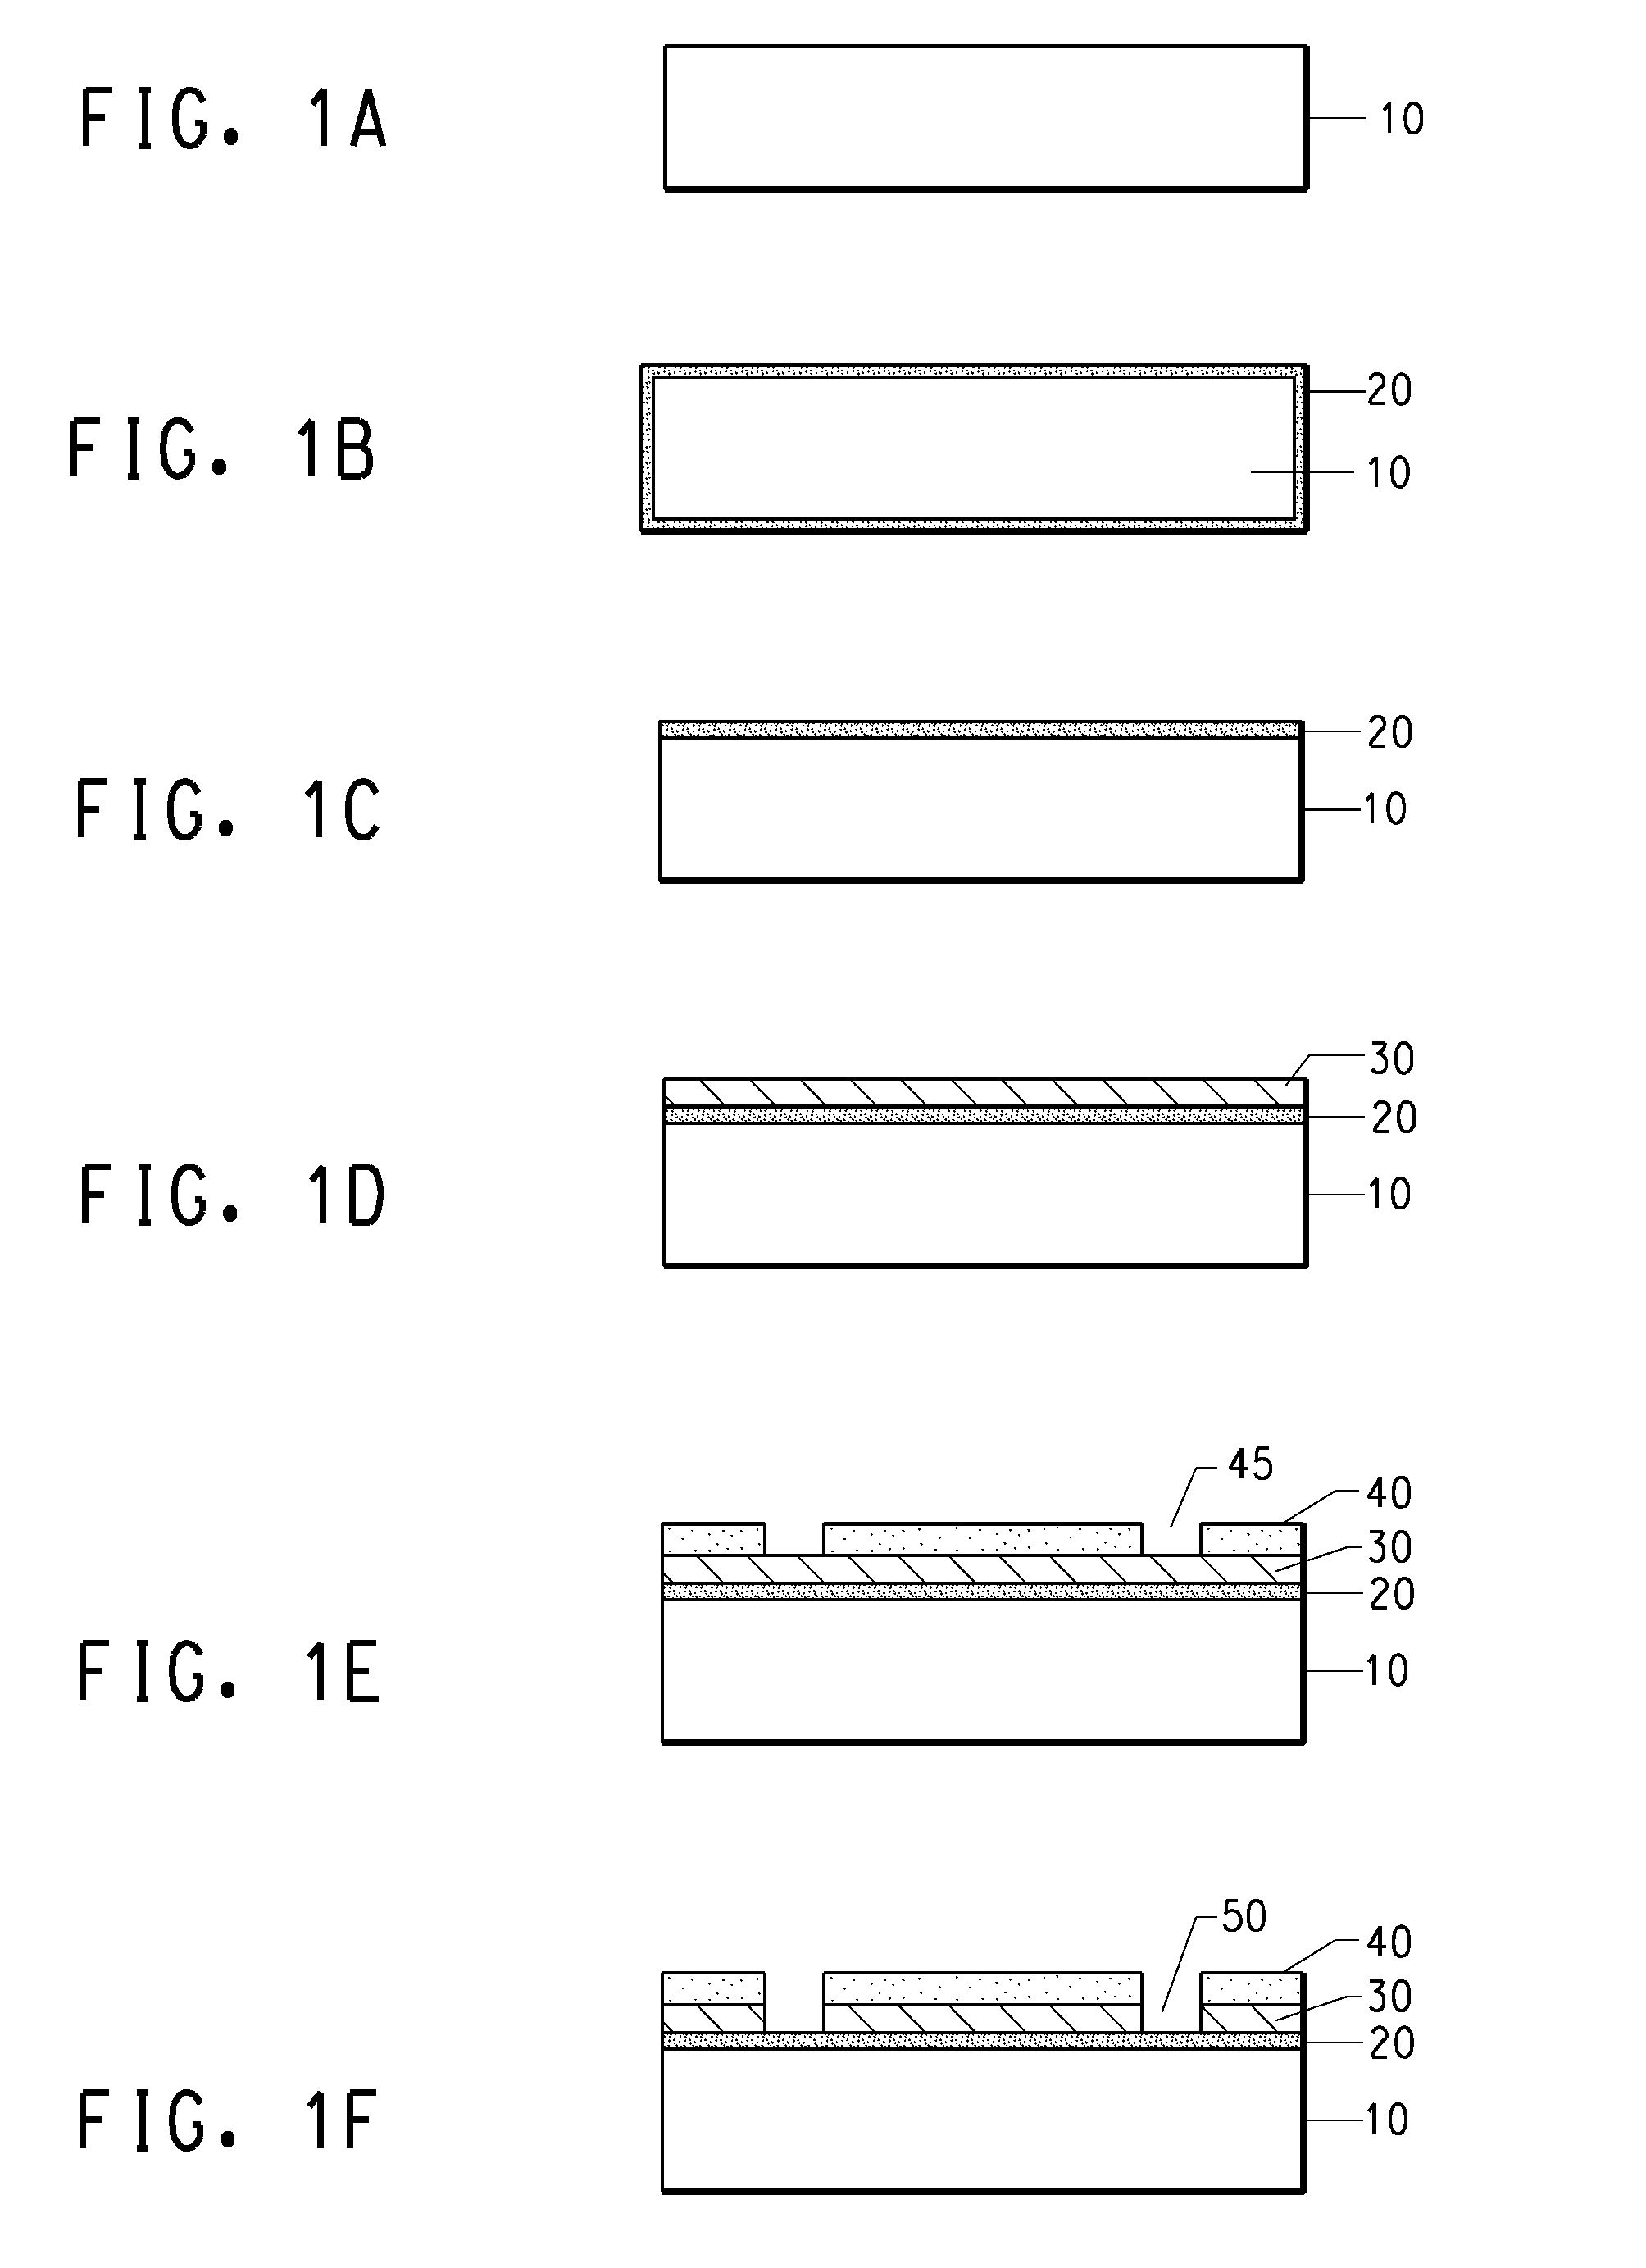 Compositions and processes for forming photovoltaic devices